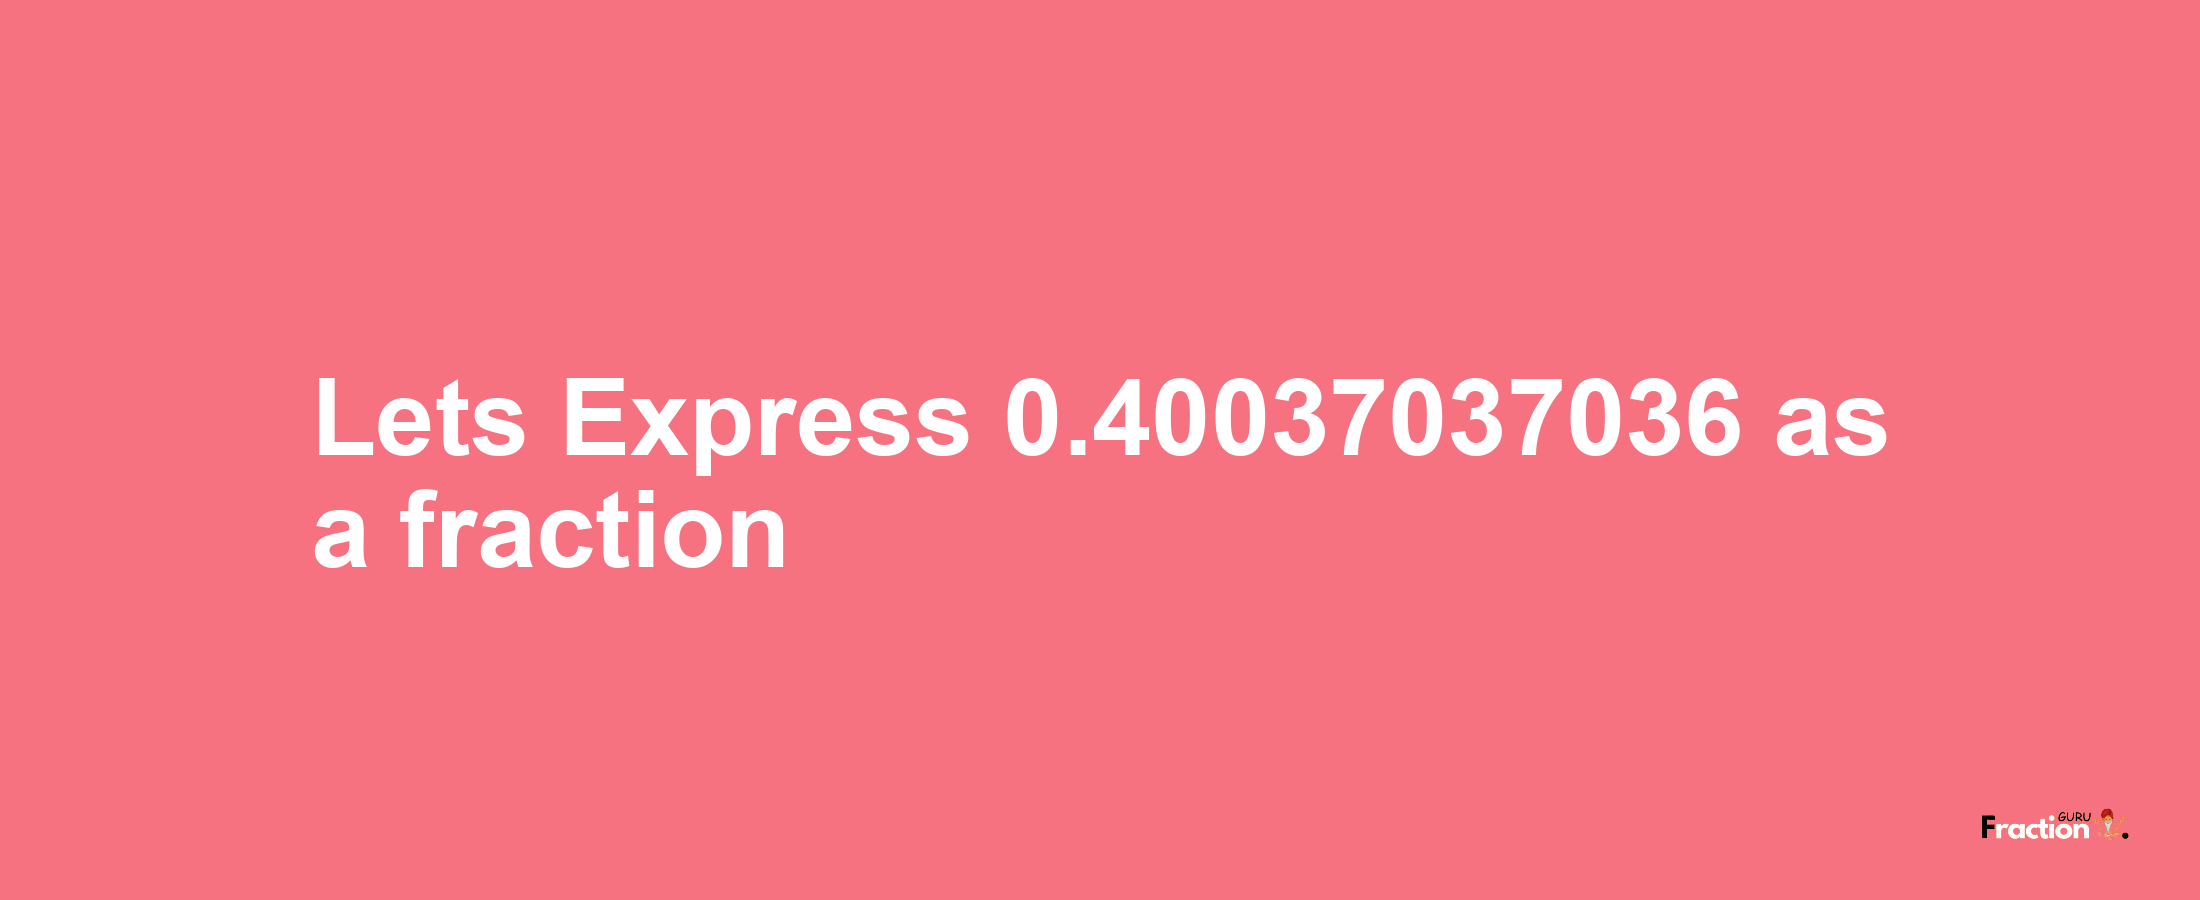 Lets Express 0.40037037036 as afraction